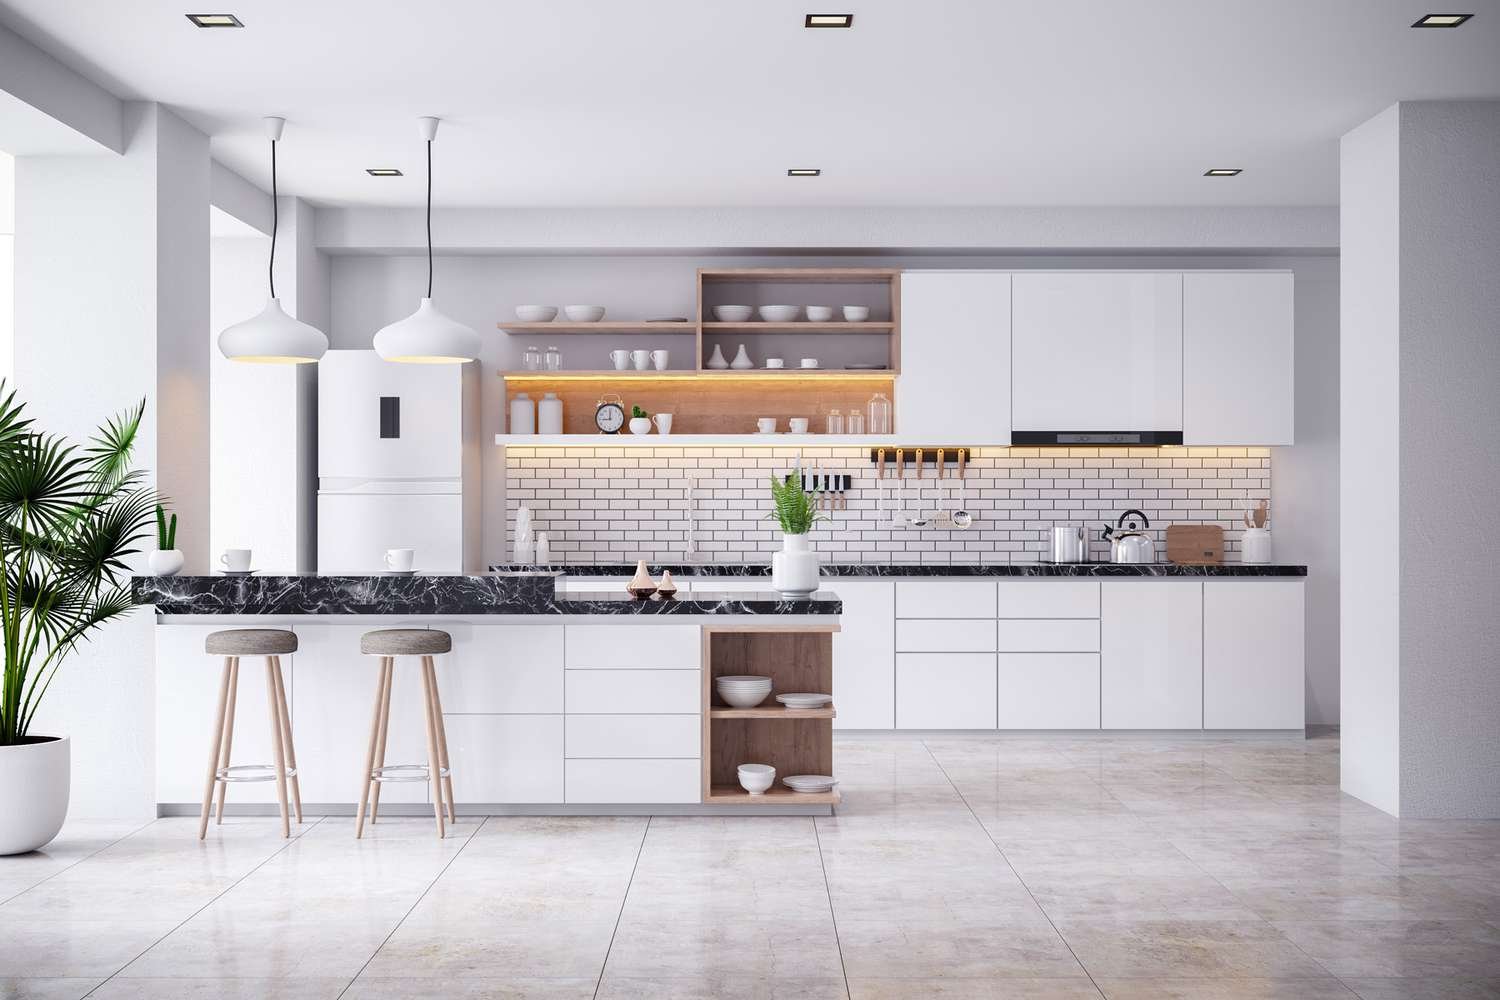 Kitchen Renovation and Decor Trends You Should Try This Year